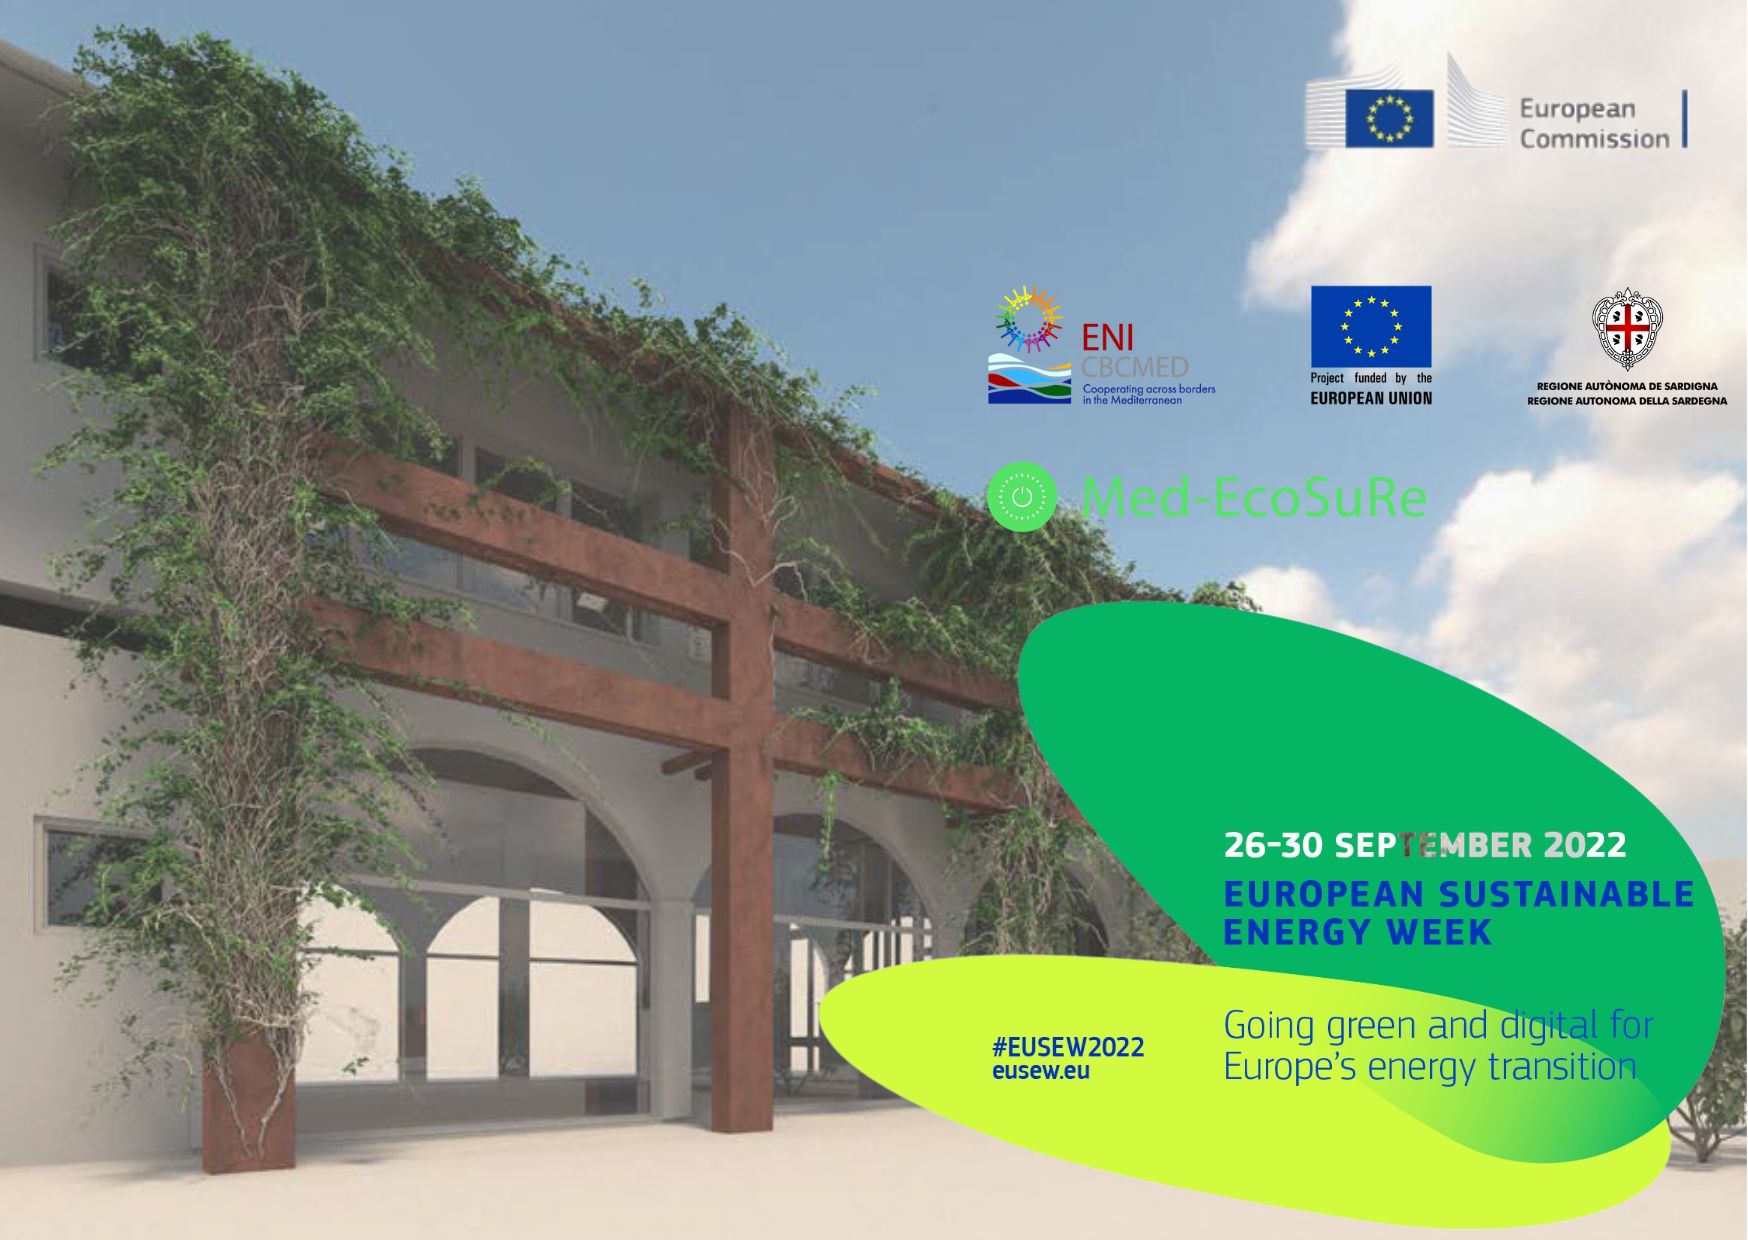 Med-EcoSuRe to be showcased in EU Sustainable Energy Week 2022